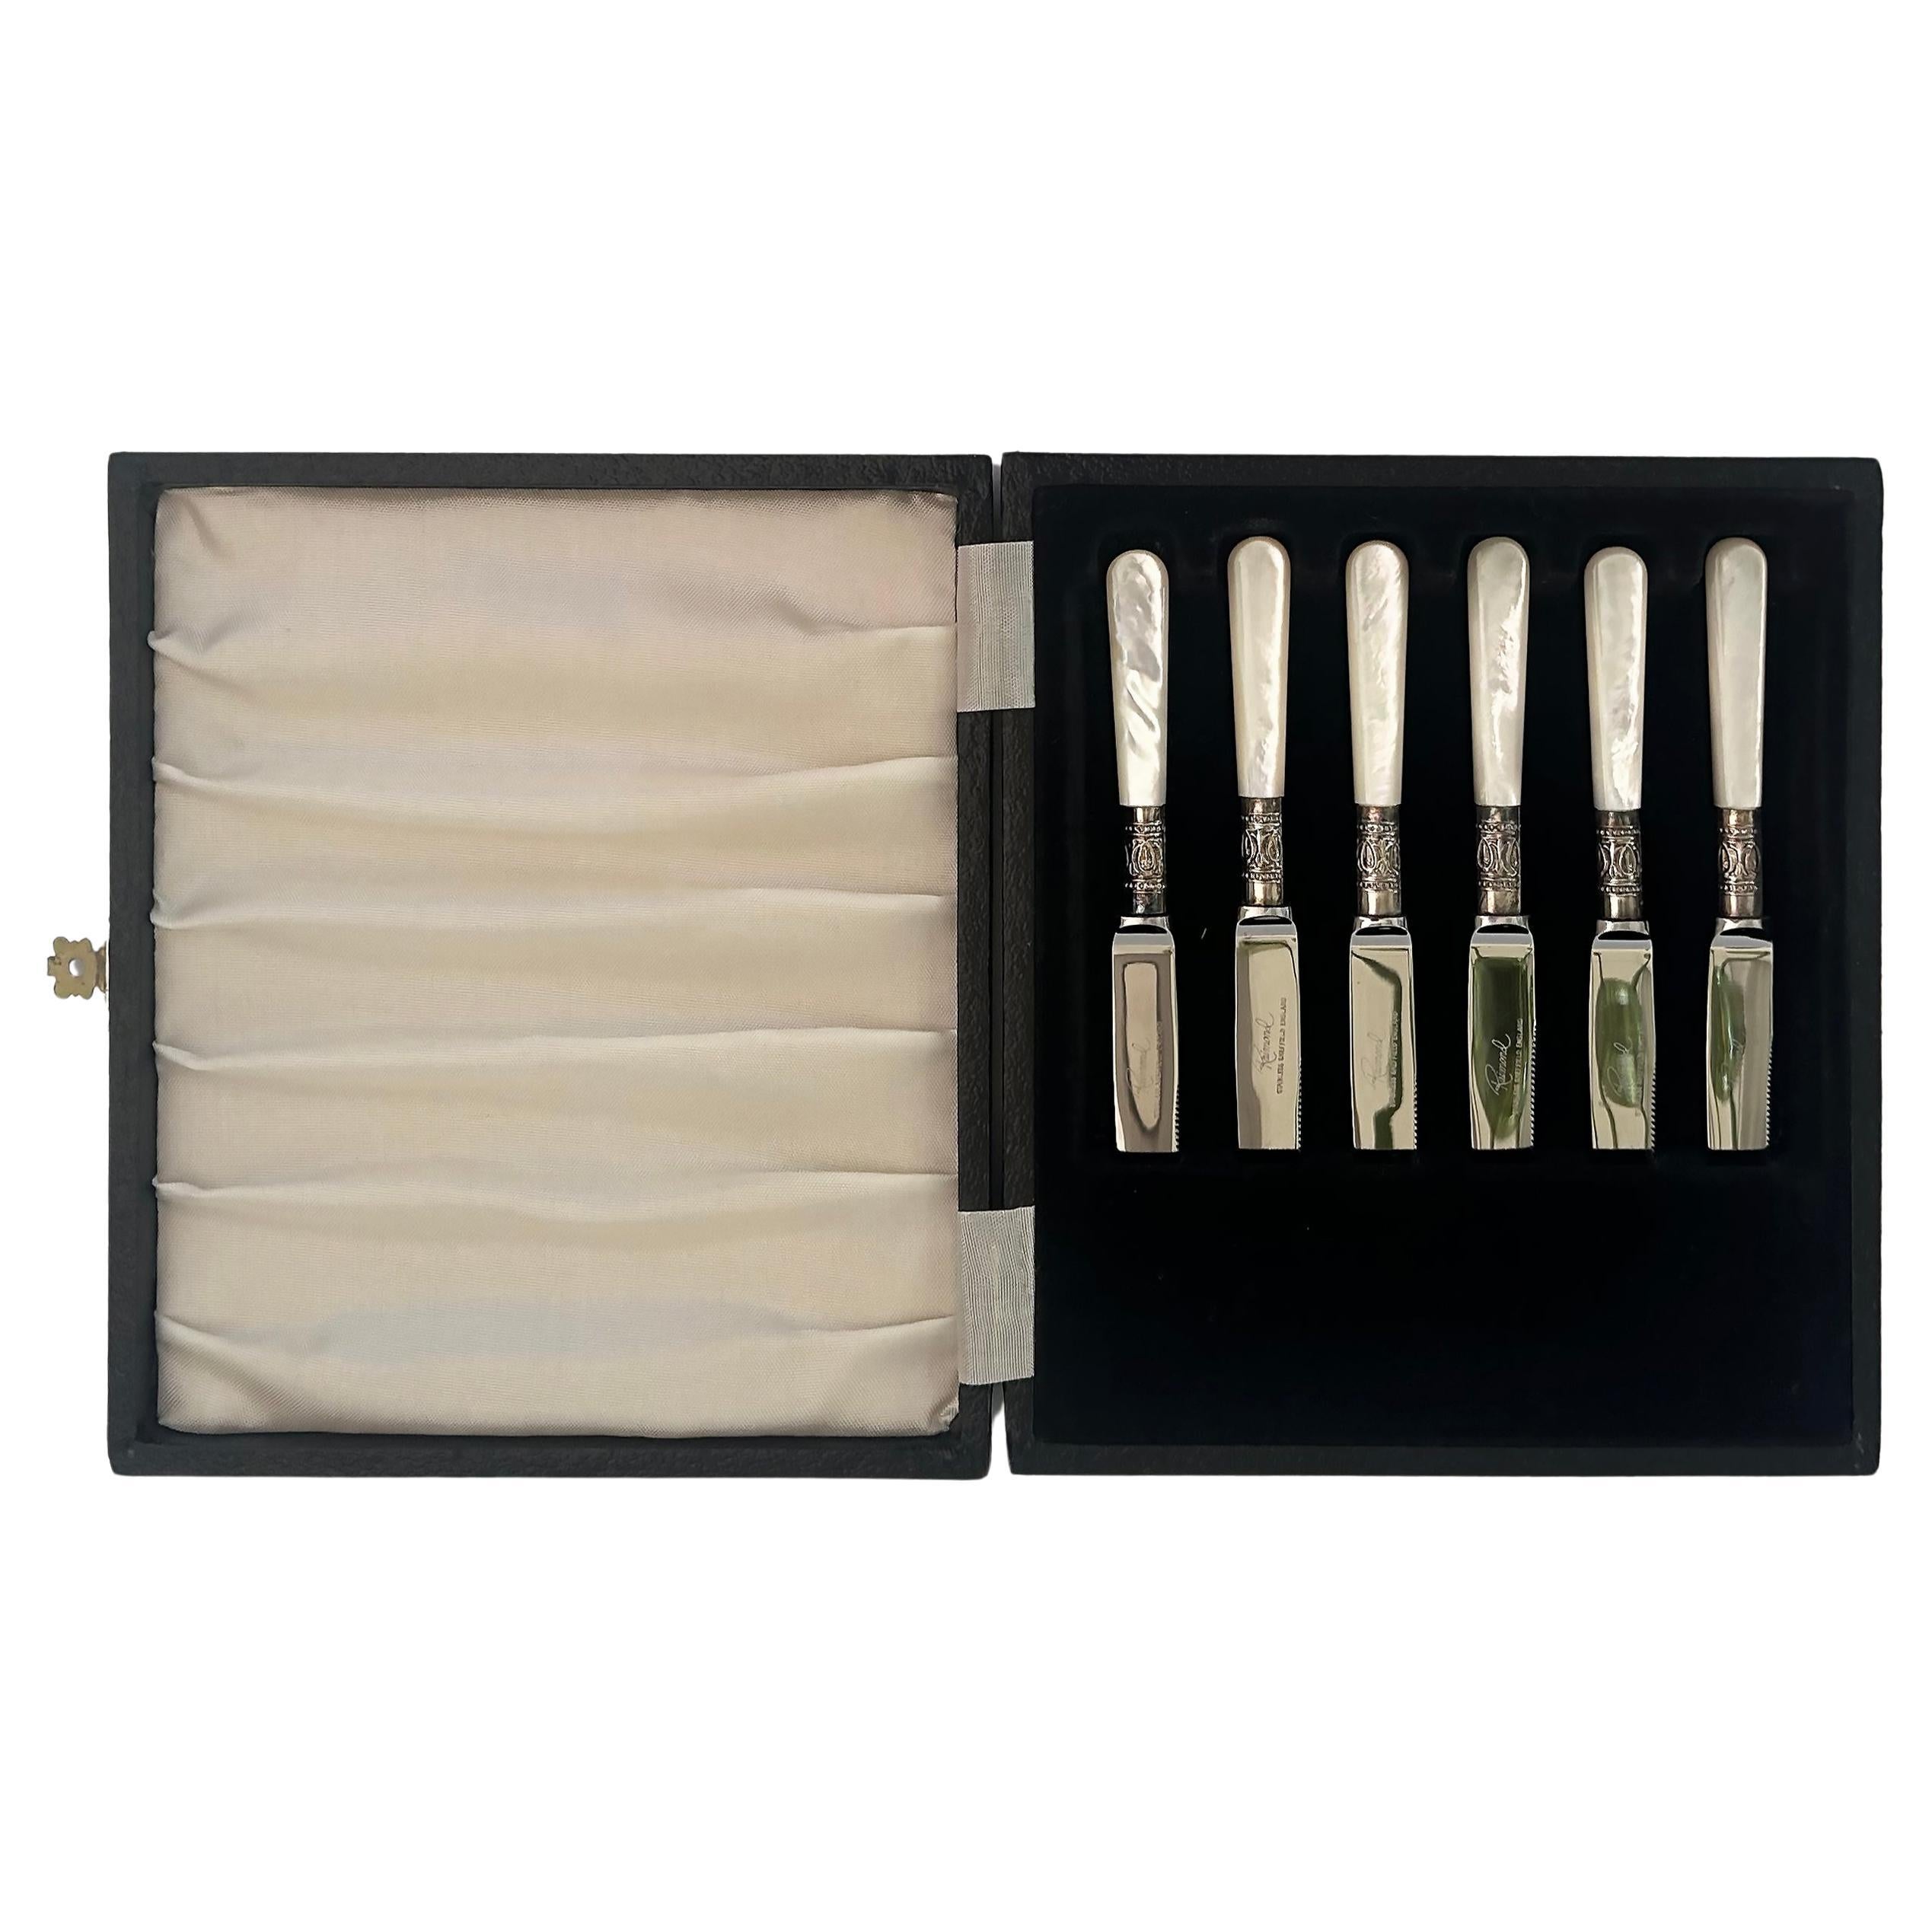 Vintage Raimond Sheffield England Mother-of-Pearl Fruit Knives Silver Plated Set